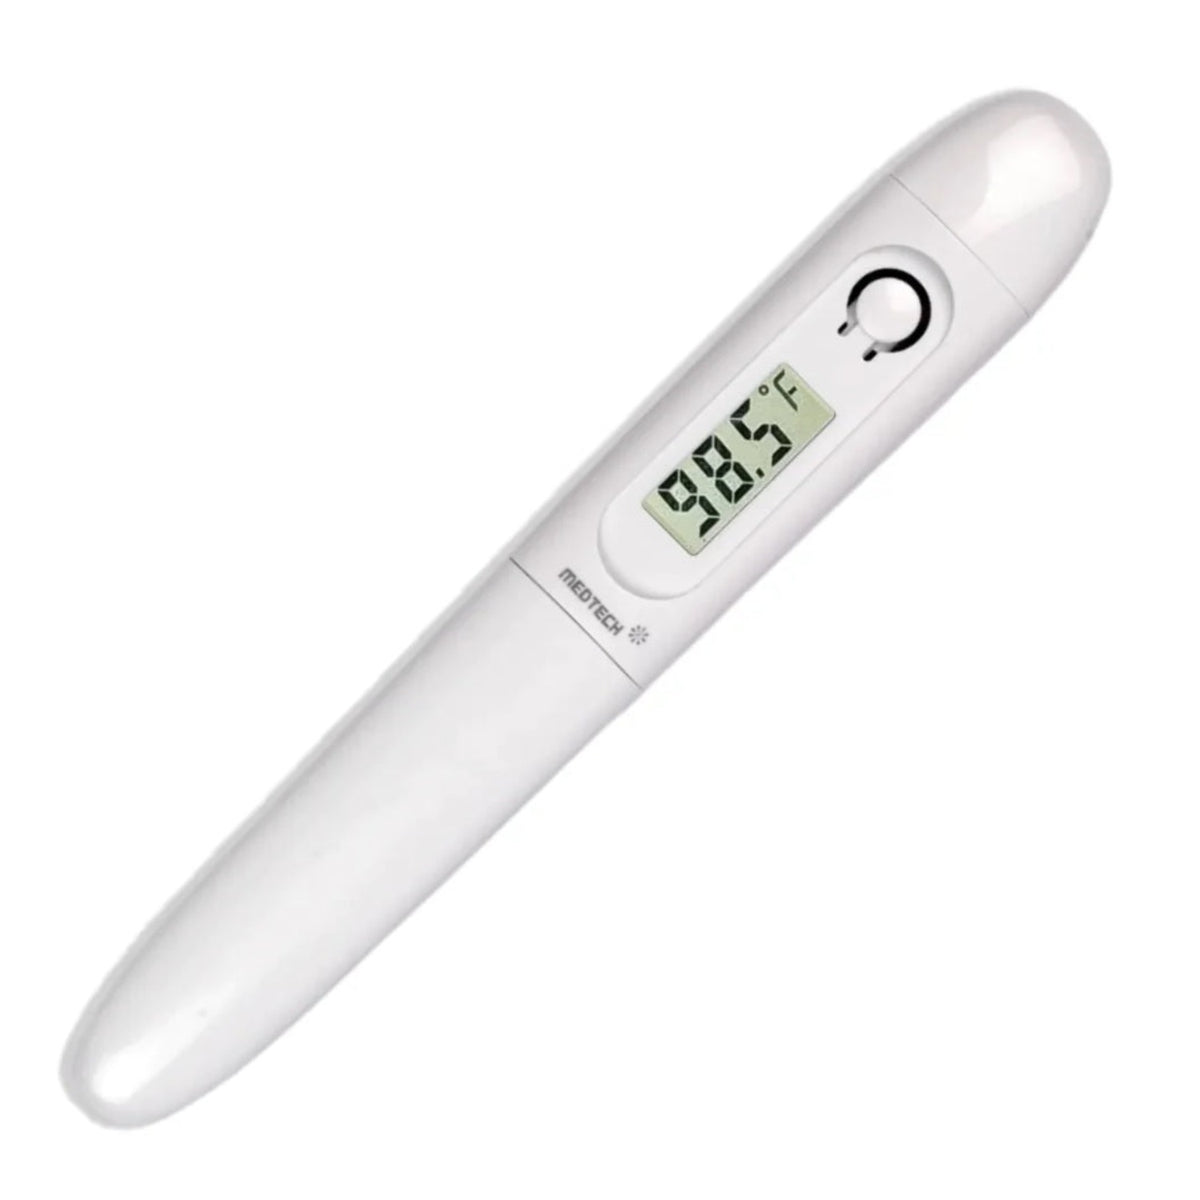 Medtech Digitalthermometer TMP 02